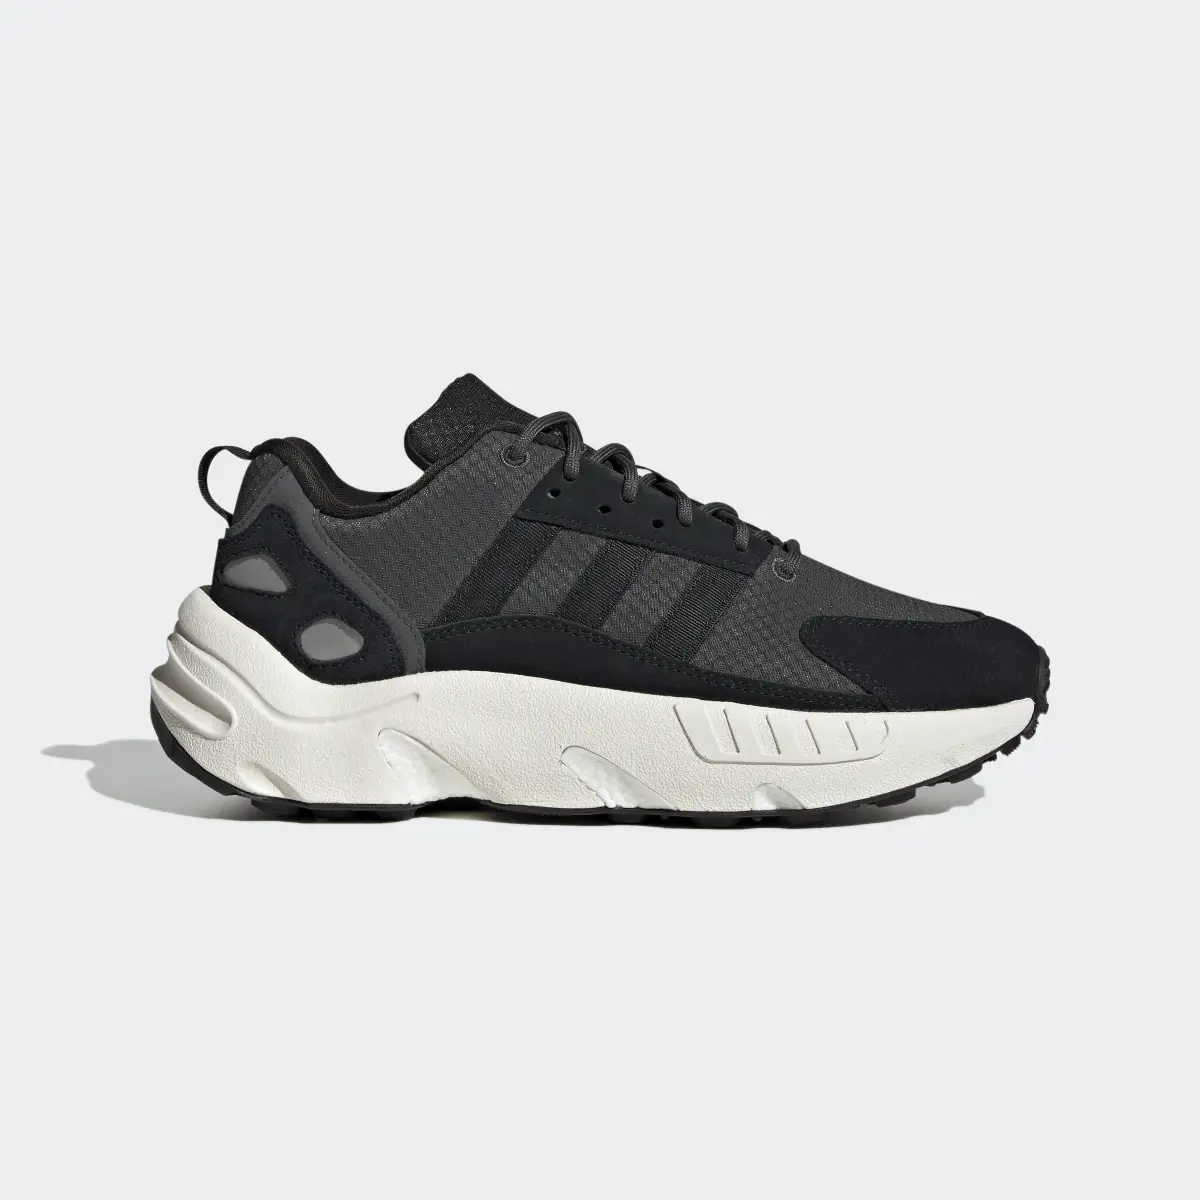 Adidas ZX 22 BOOST Shoes. 2